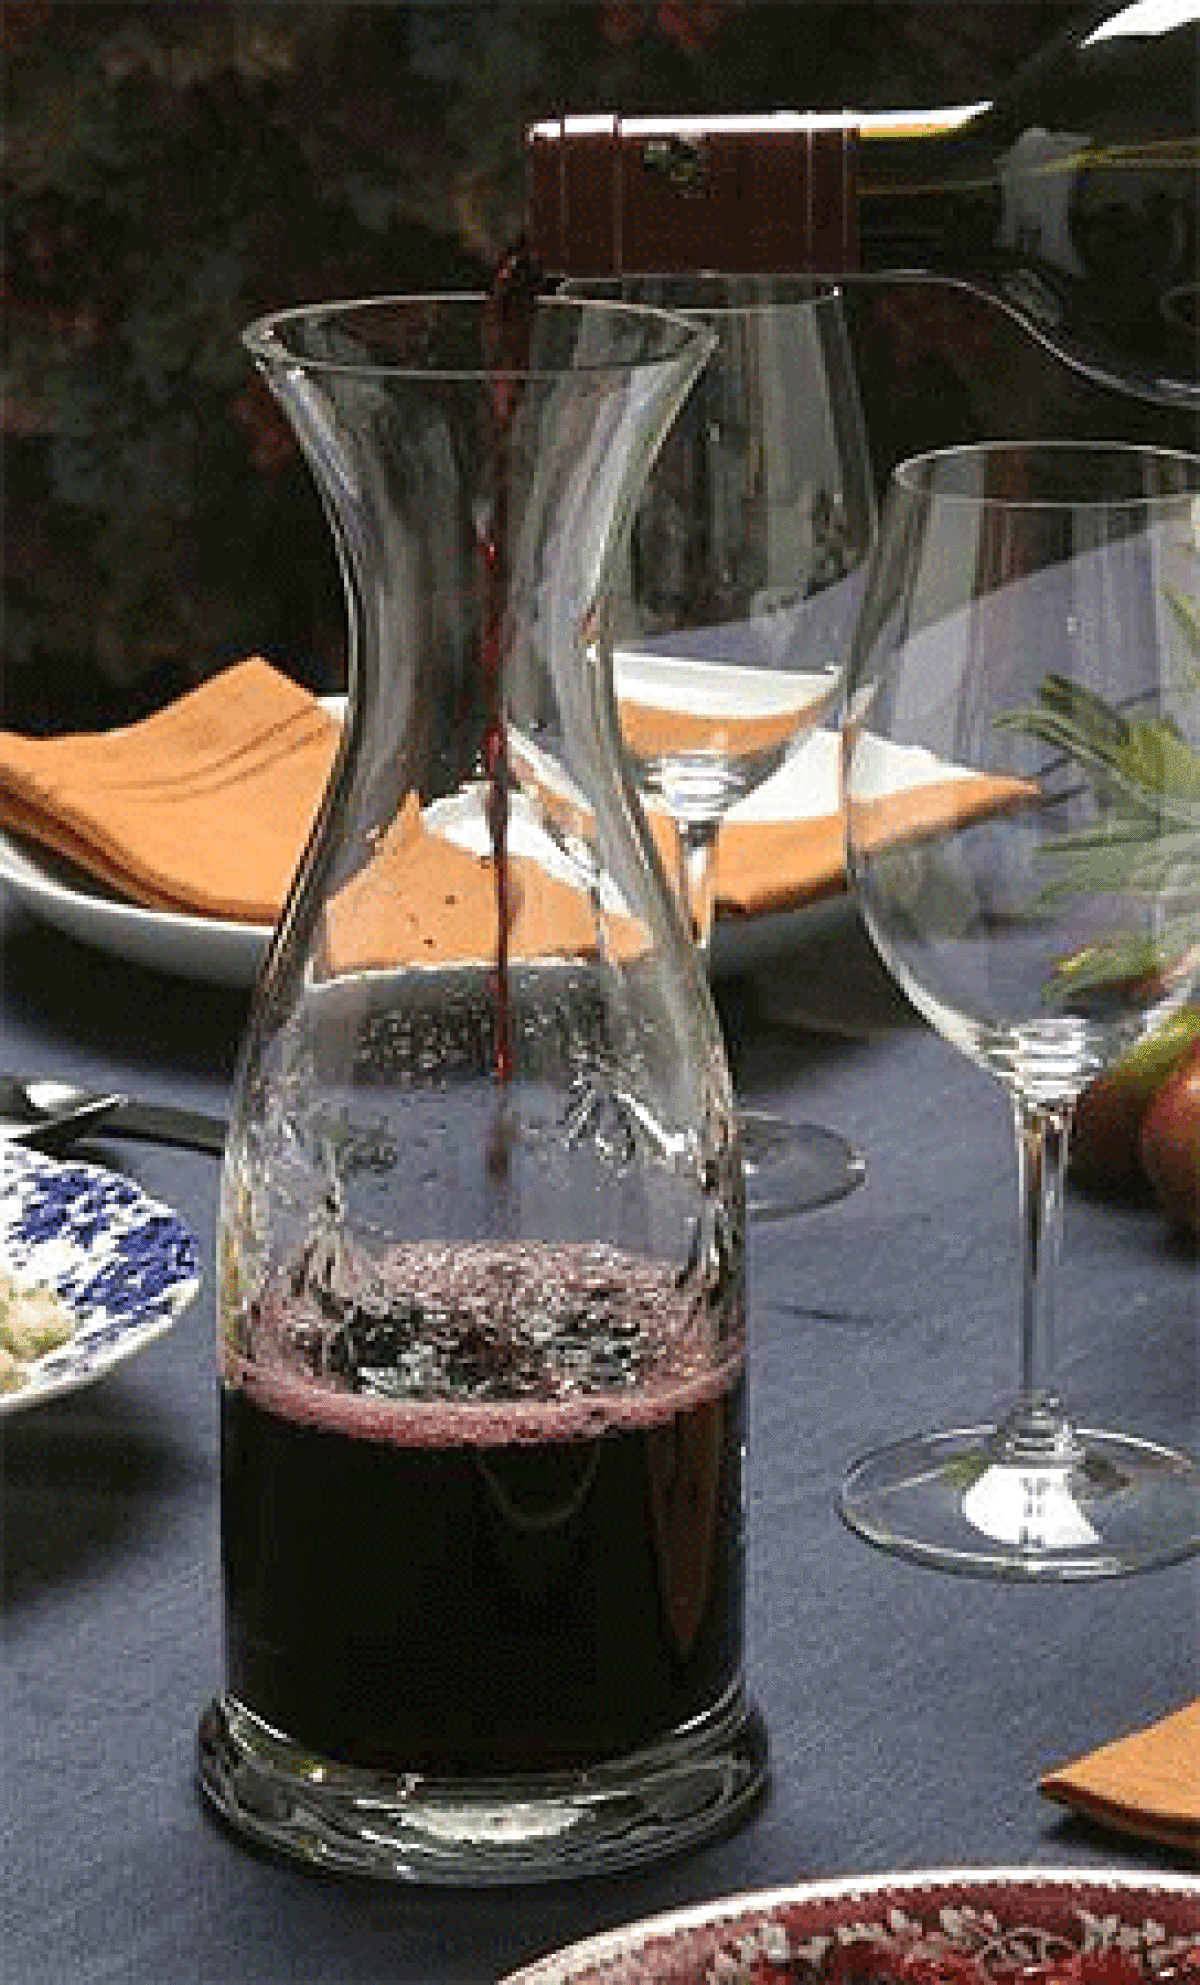 Decanting oxygenates a young wine, opening it up and releasing its bouquet.